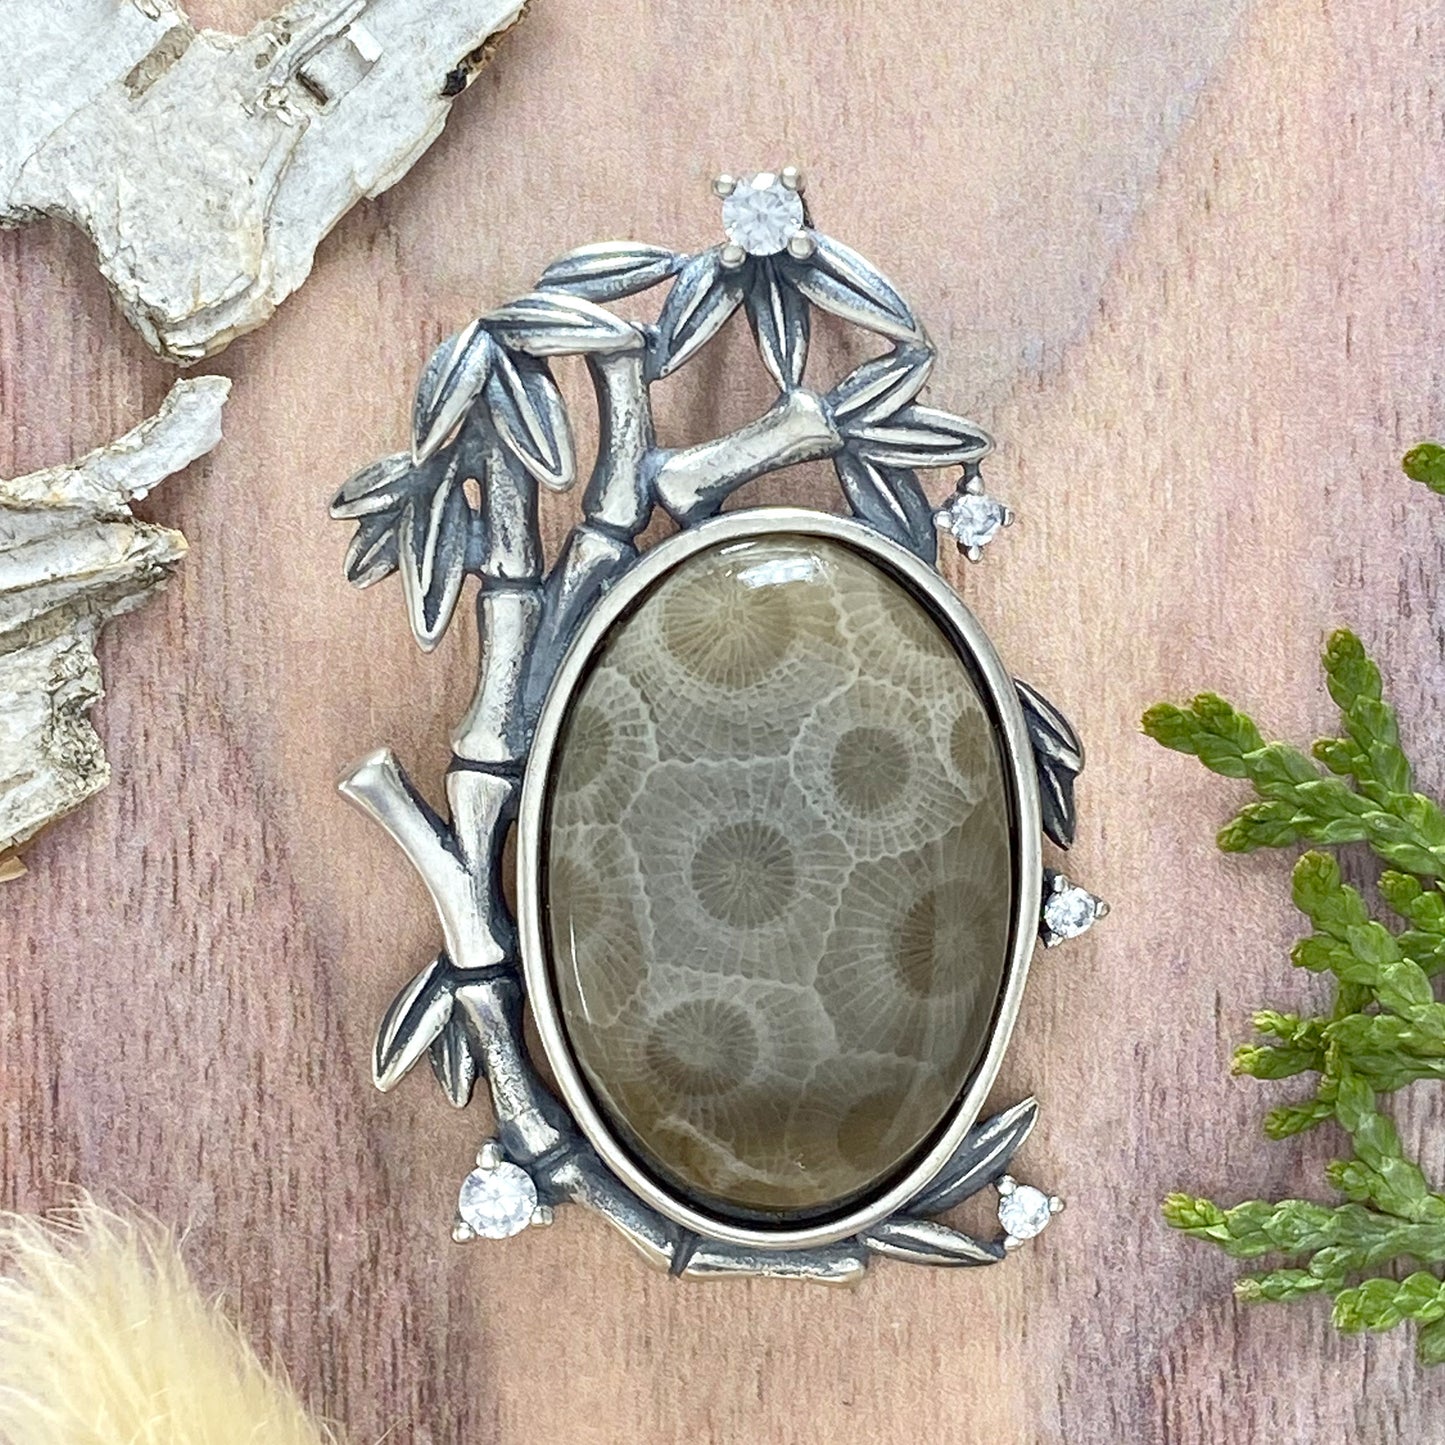 Petoskey Stone Pendant Front View - Stone Treasures by the Lake